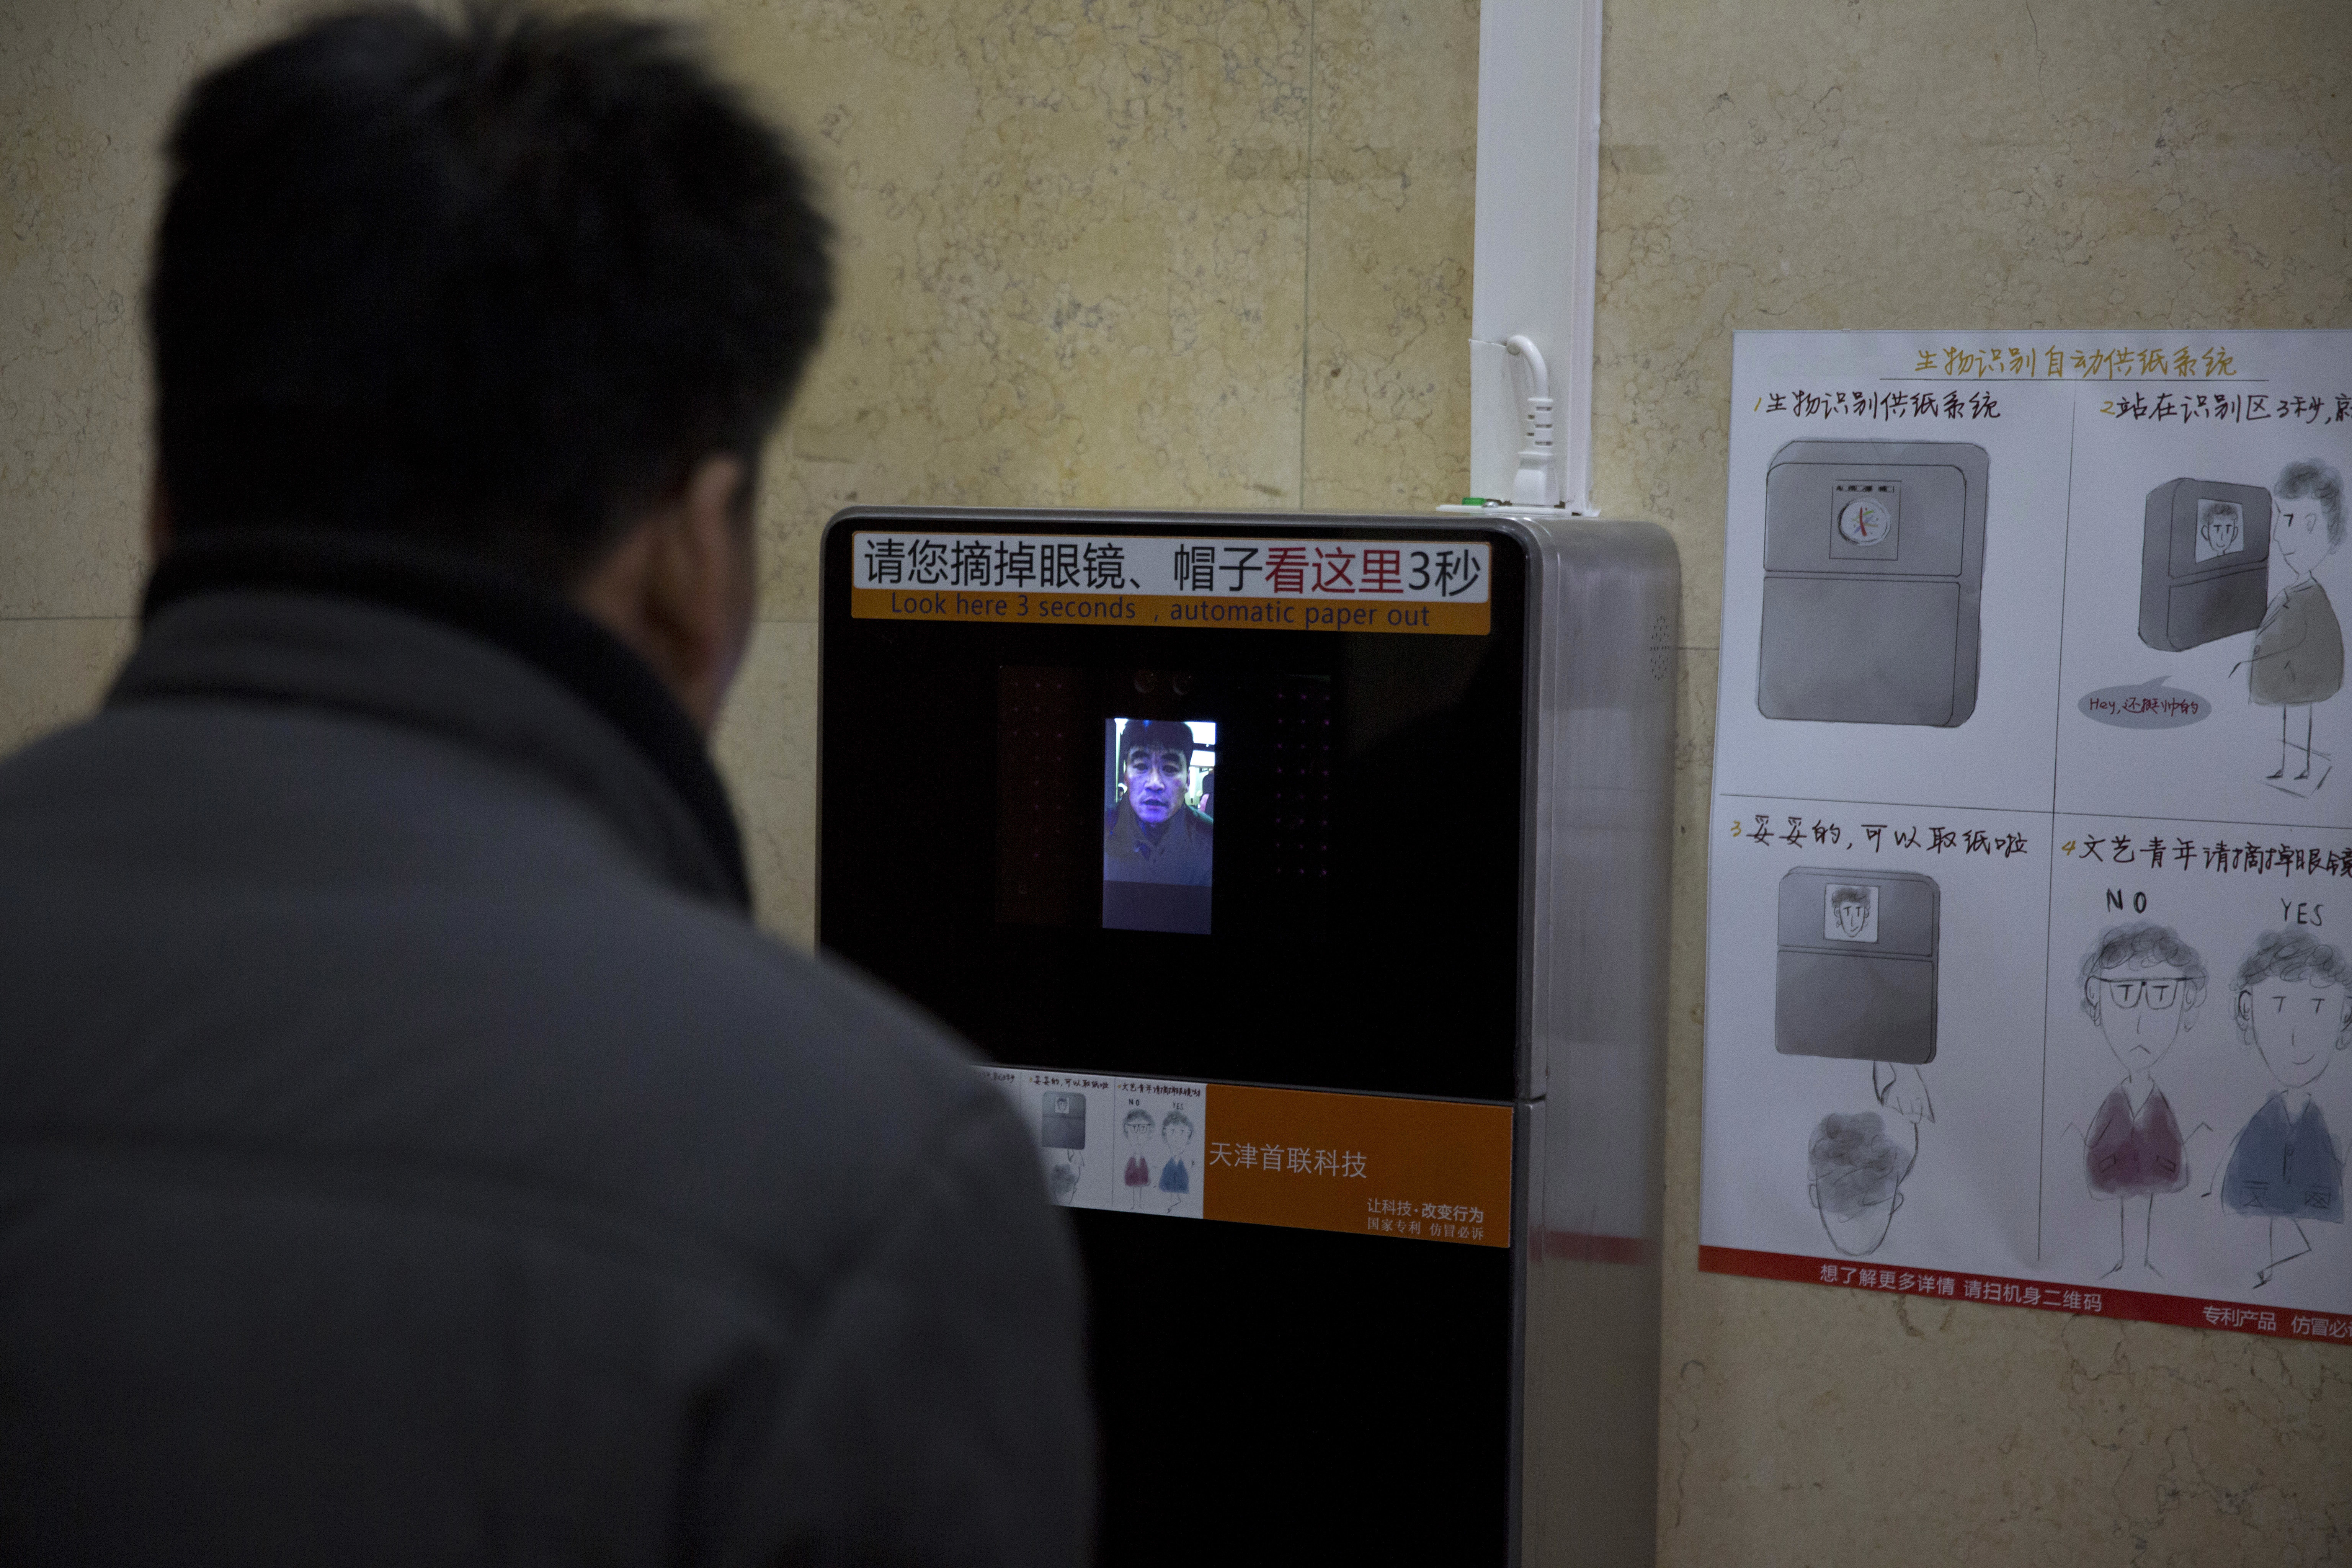 In this photo taken Tuesday, March 21, 2017, a man tries out a facial recognition toilet paper dispenser at a toilet in the Temple of Heaven park in Beijing, China. At Beijing's 600-year-old Temple of Heaven, administrators recognized the need to stock the public bathrooms with toilet paper, a requirement for obtaining a top rating from the National Tourism Authority. But they needed a means of preventing patrons from stripping them bare for personal use - hence the introduction of new technology that dispenses just one 60-centimeter (2-foot) section of paper every nine minutes following a face scan. (AP Photo/Ng Han Guan)